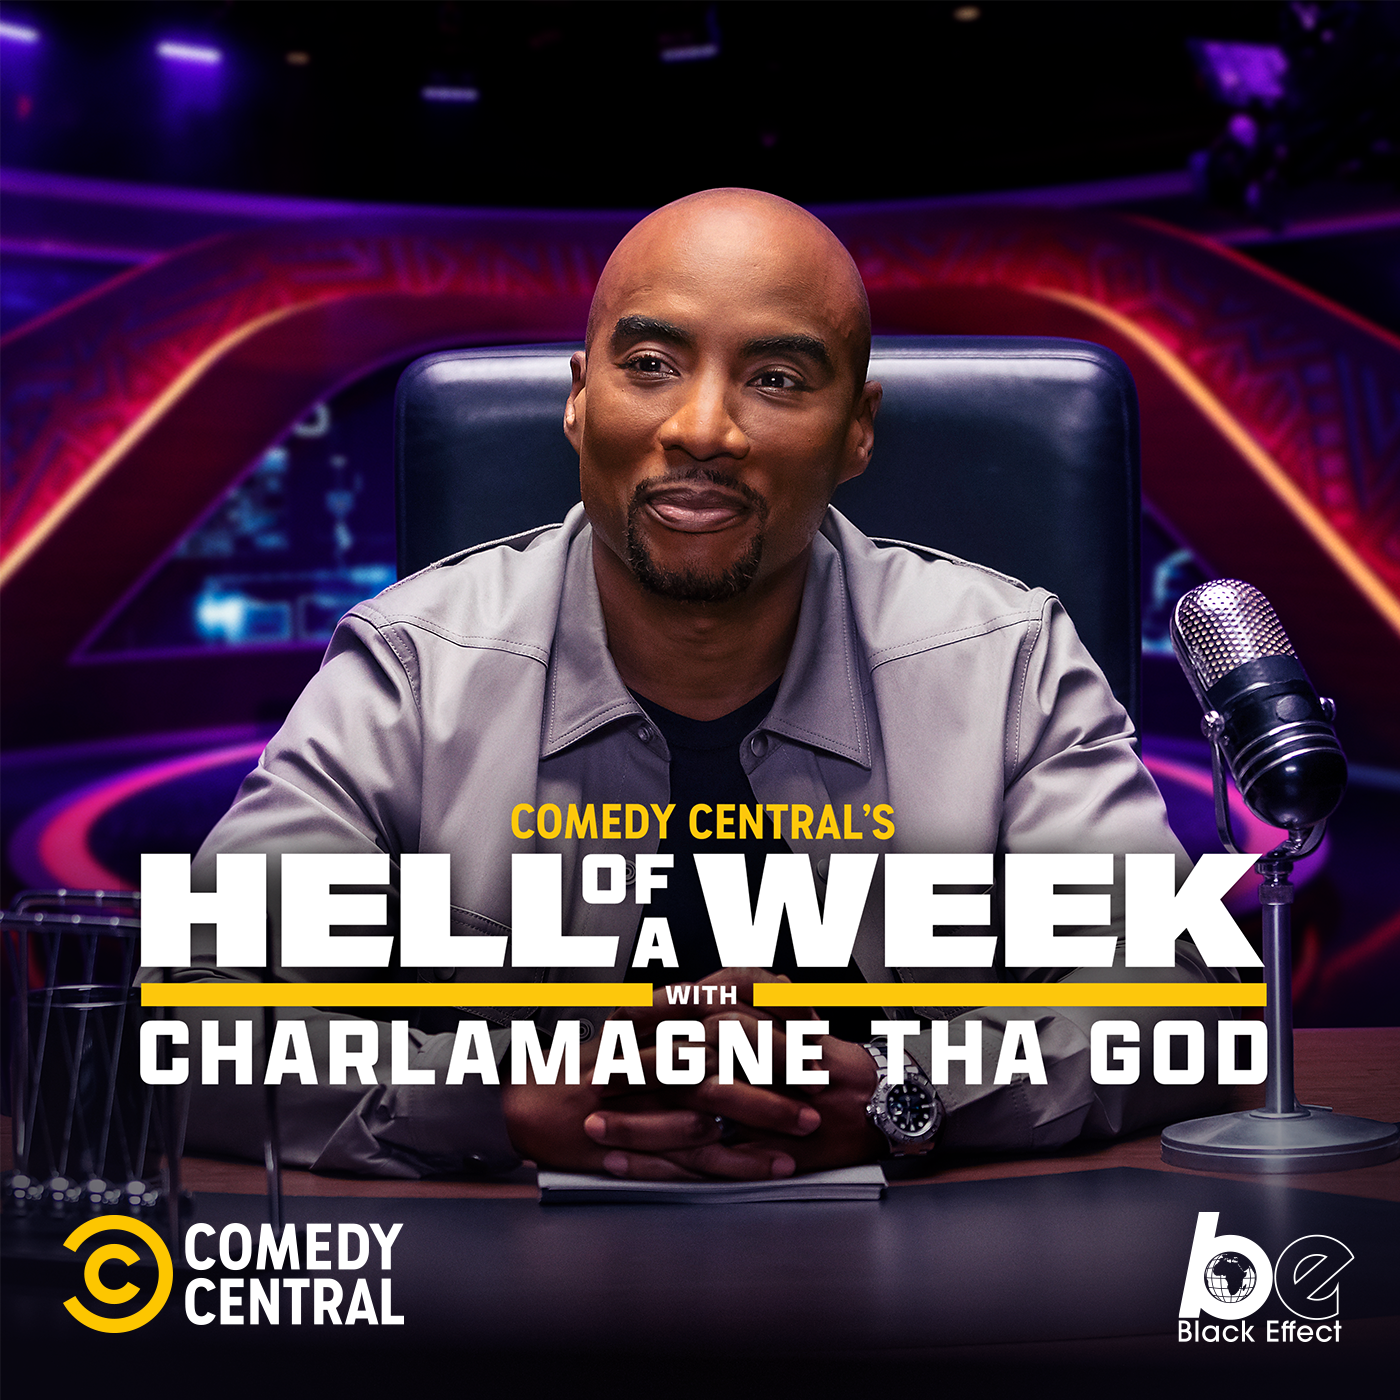 Comedy Central's Hell of a Week with Charlamagne Tha God